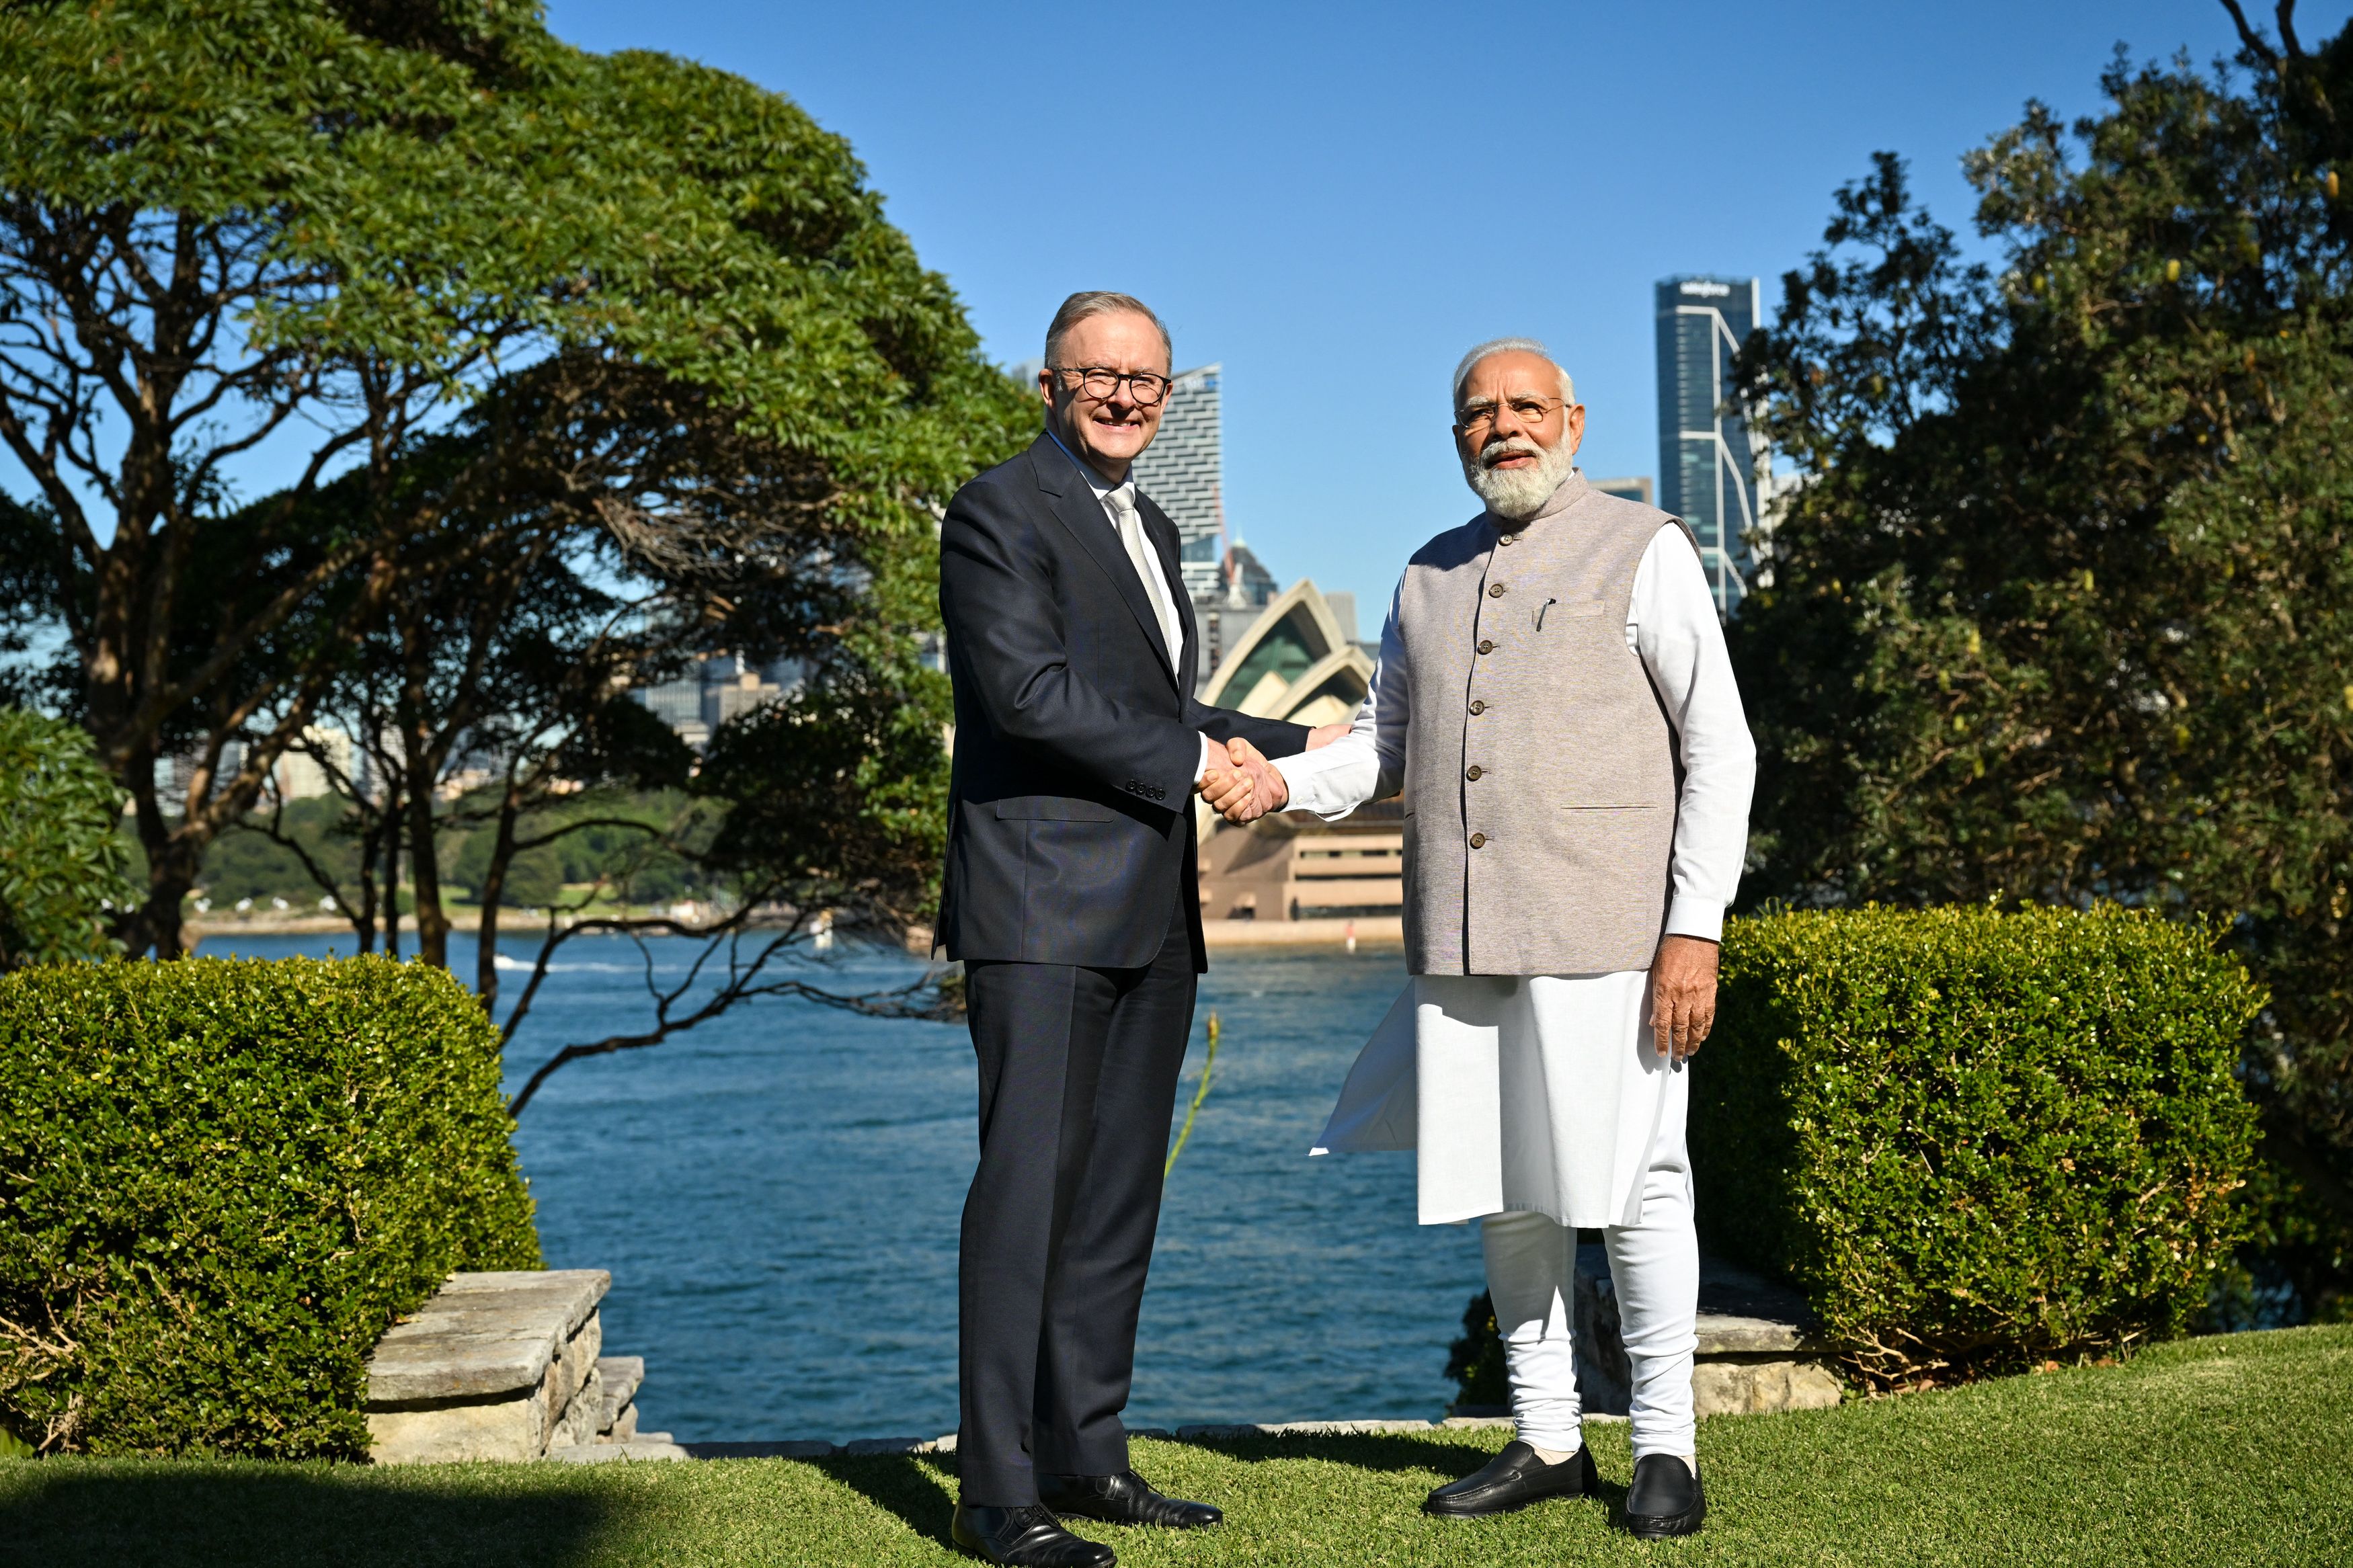 India's Prime Minister Narendra Modi (R) shakes hands with Australia's Prime Minister Anthony Albanese in front of the Sydney Opera House